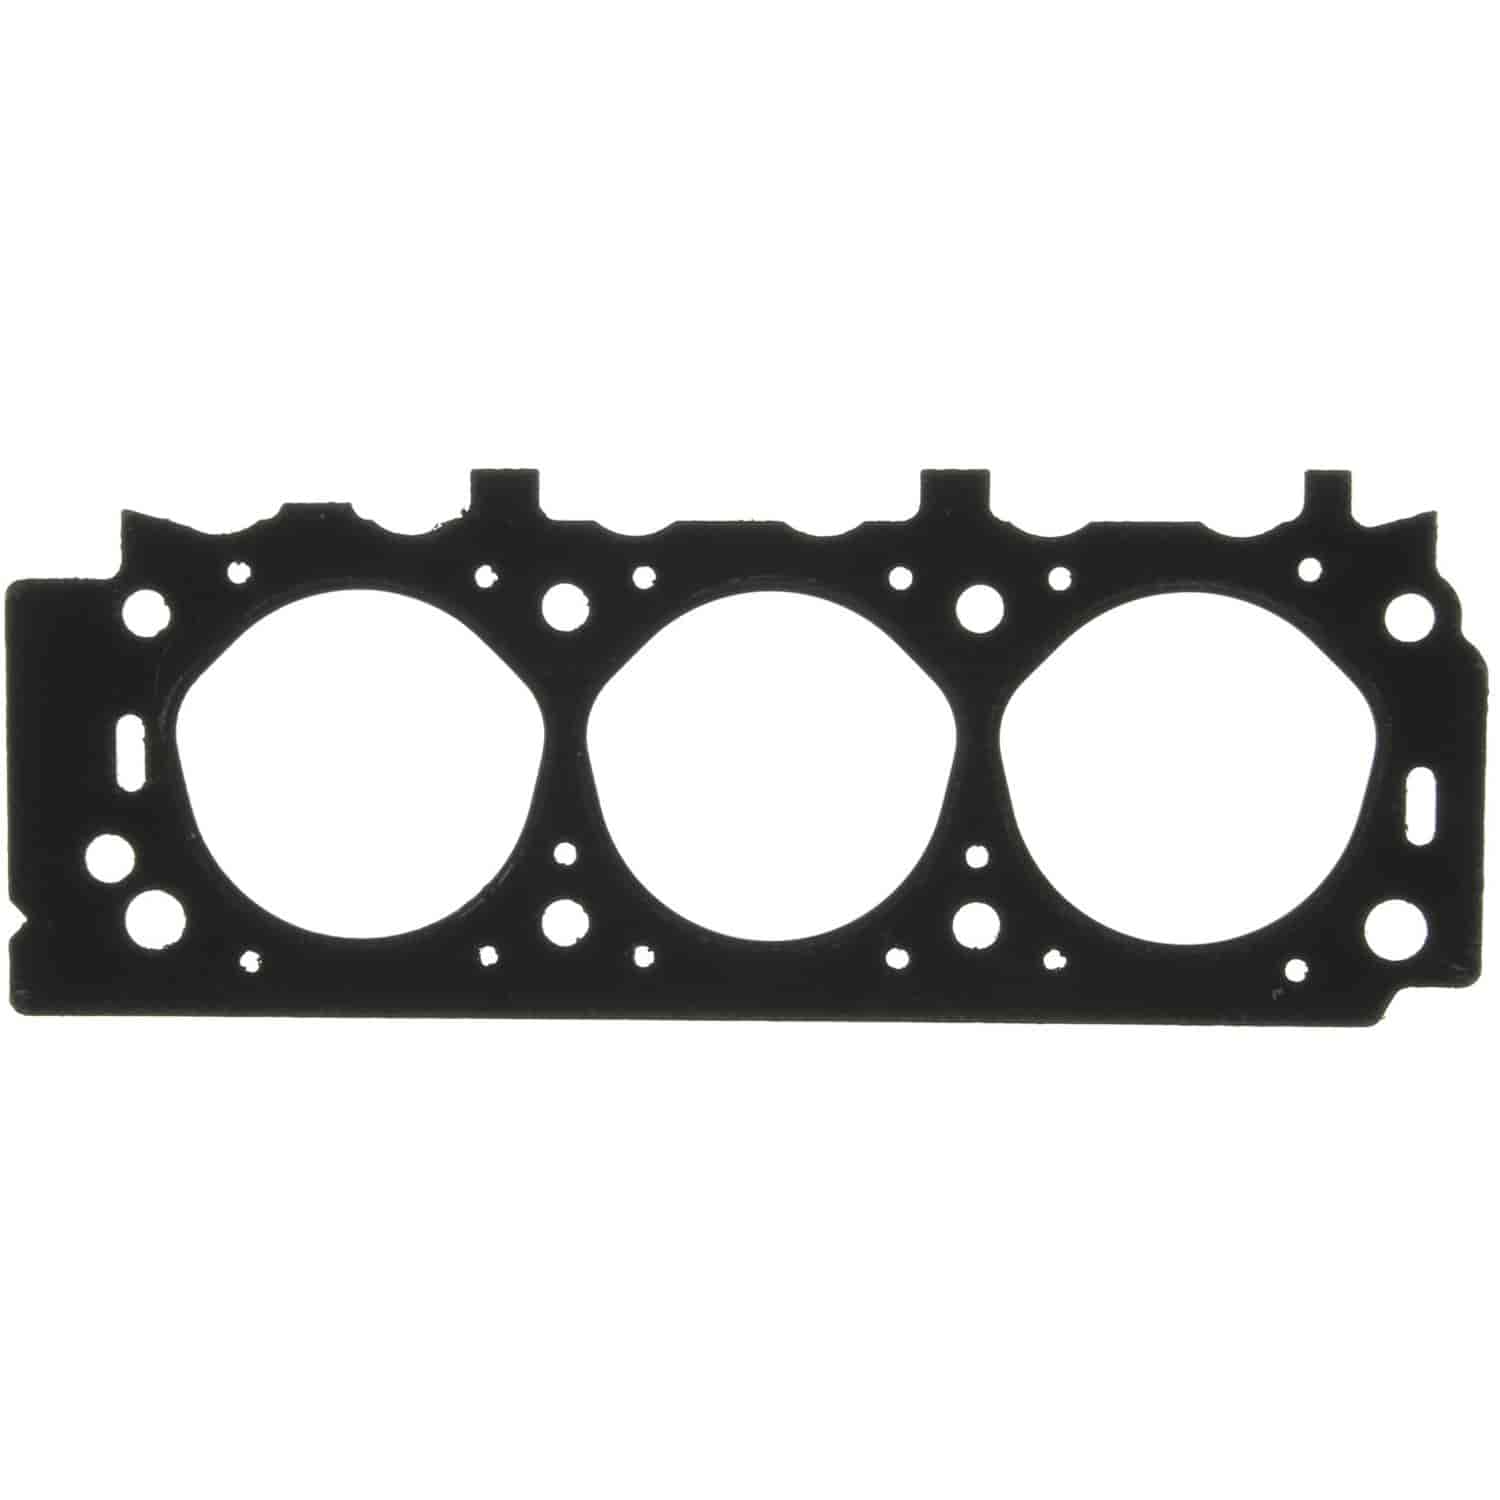 Cylinder Head Gasket Ford-Pass Merc 183 3.0L Exc.SHO